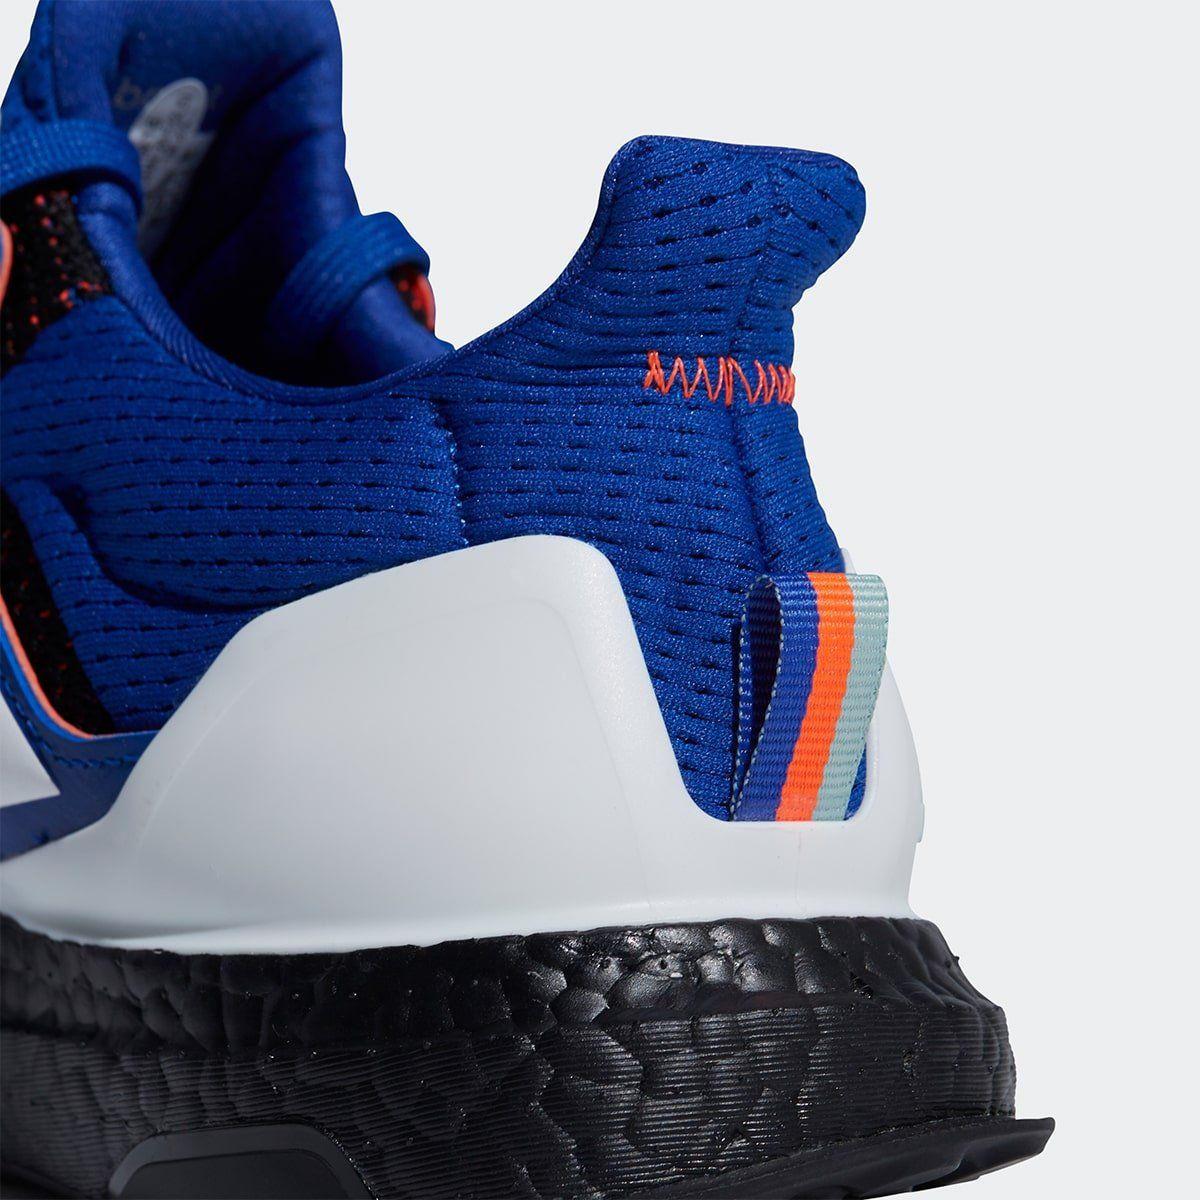 Knicks-Themed Ultra BOOSTs are Next for 